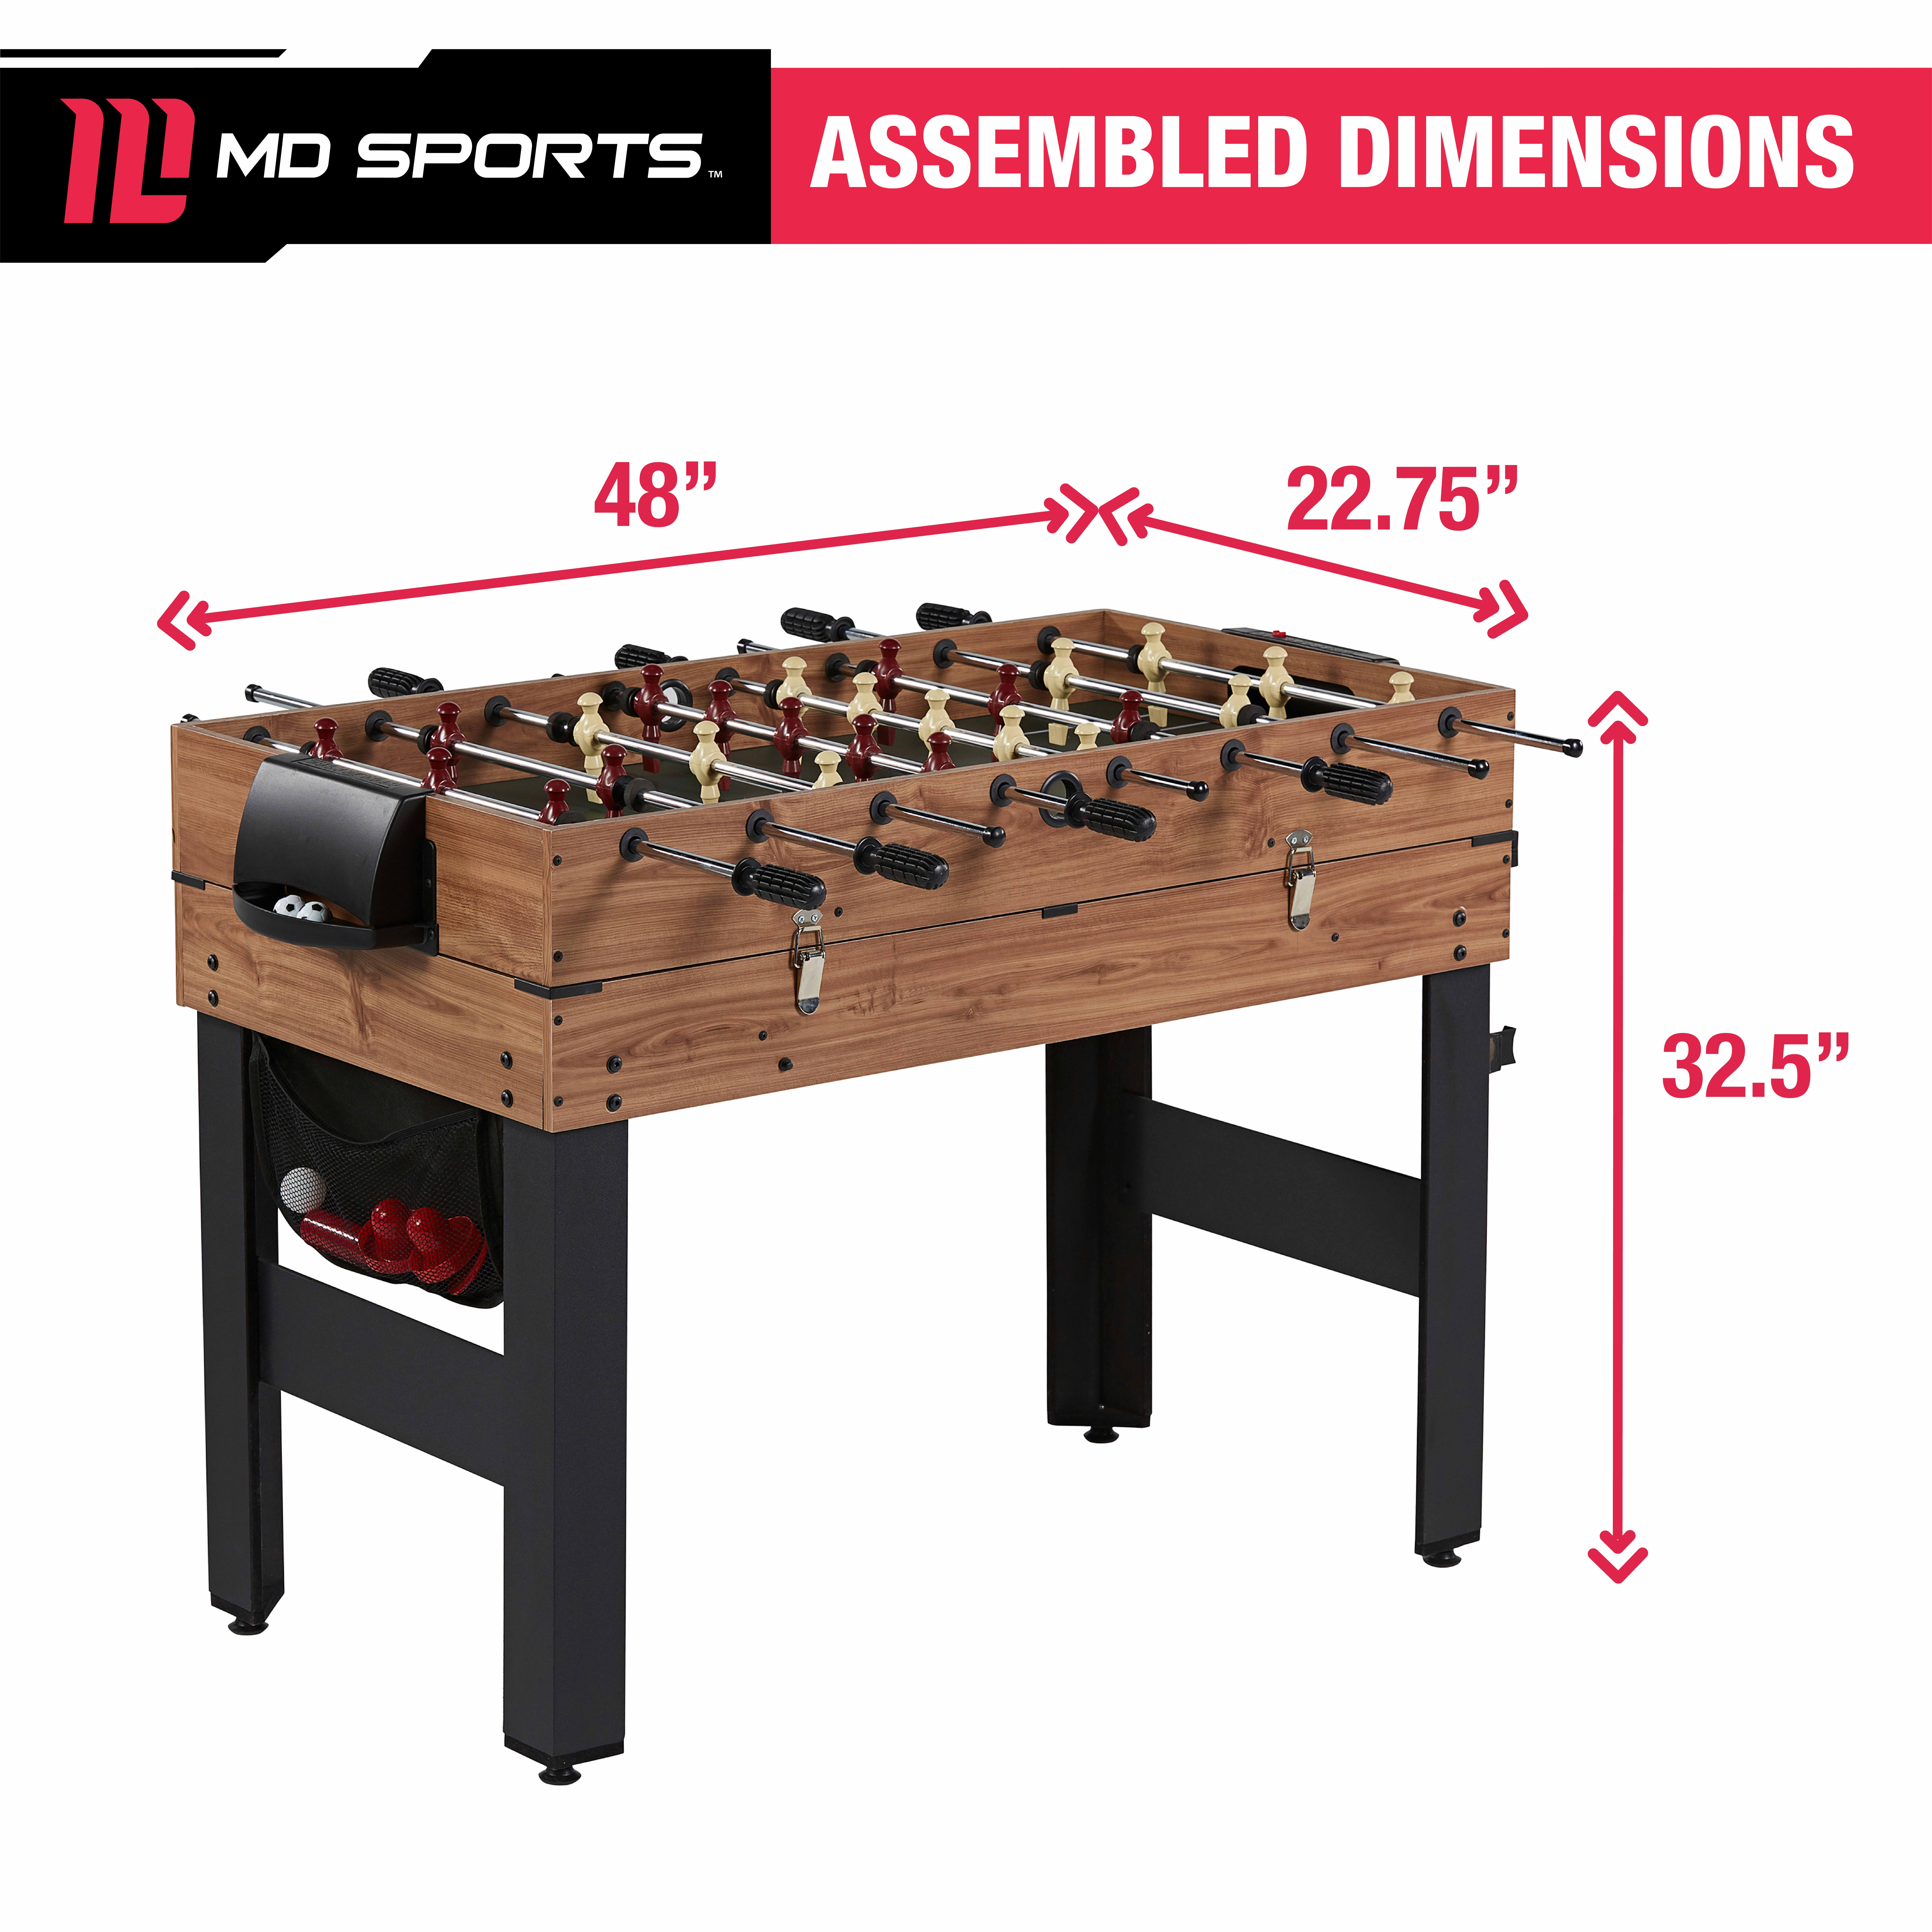 MD Sports Pool, Hockey, Foosball, Table Tennis, Basketball Combo Game Table - image 5 of 10